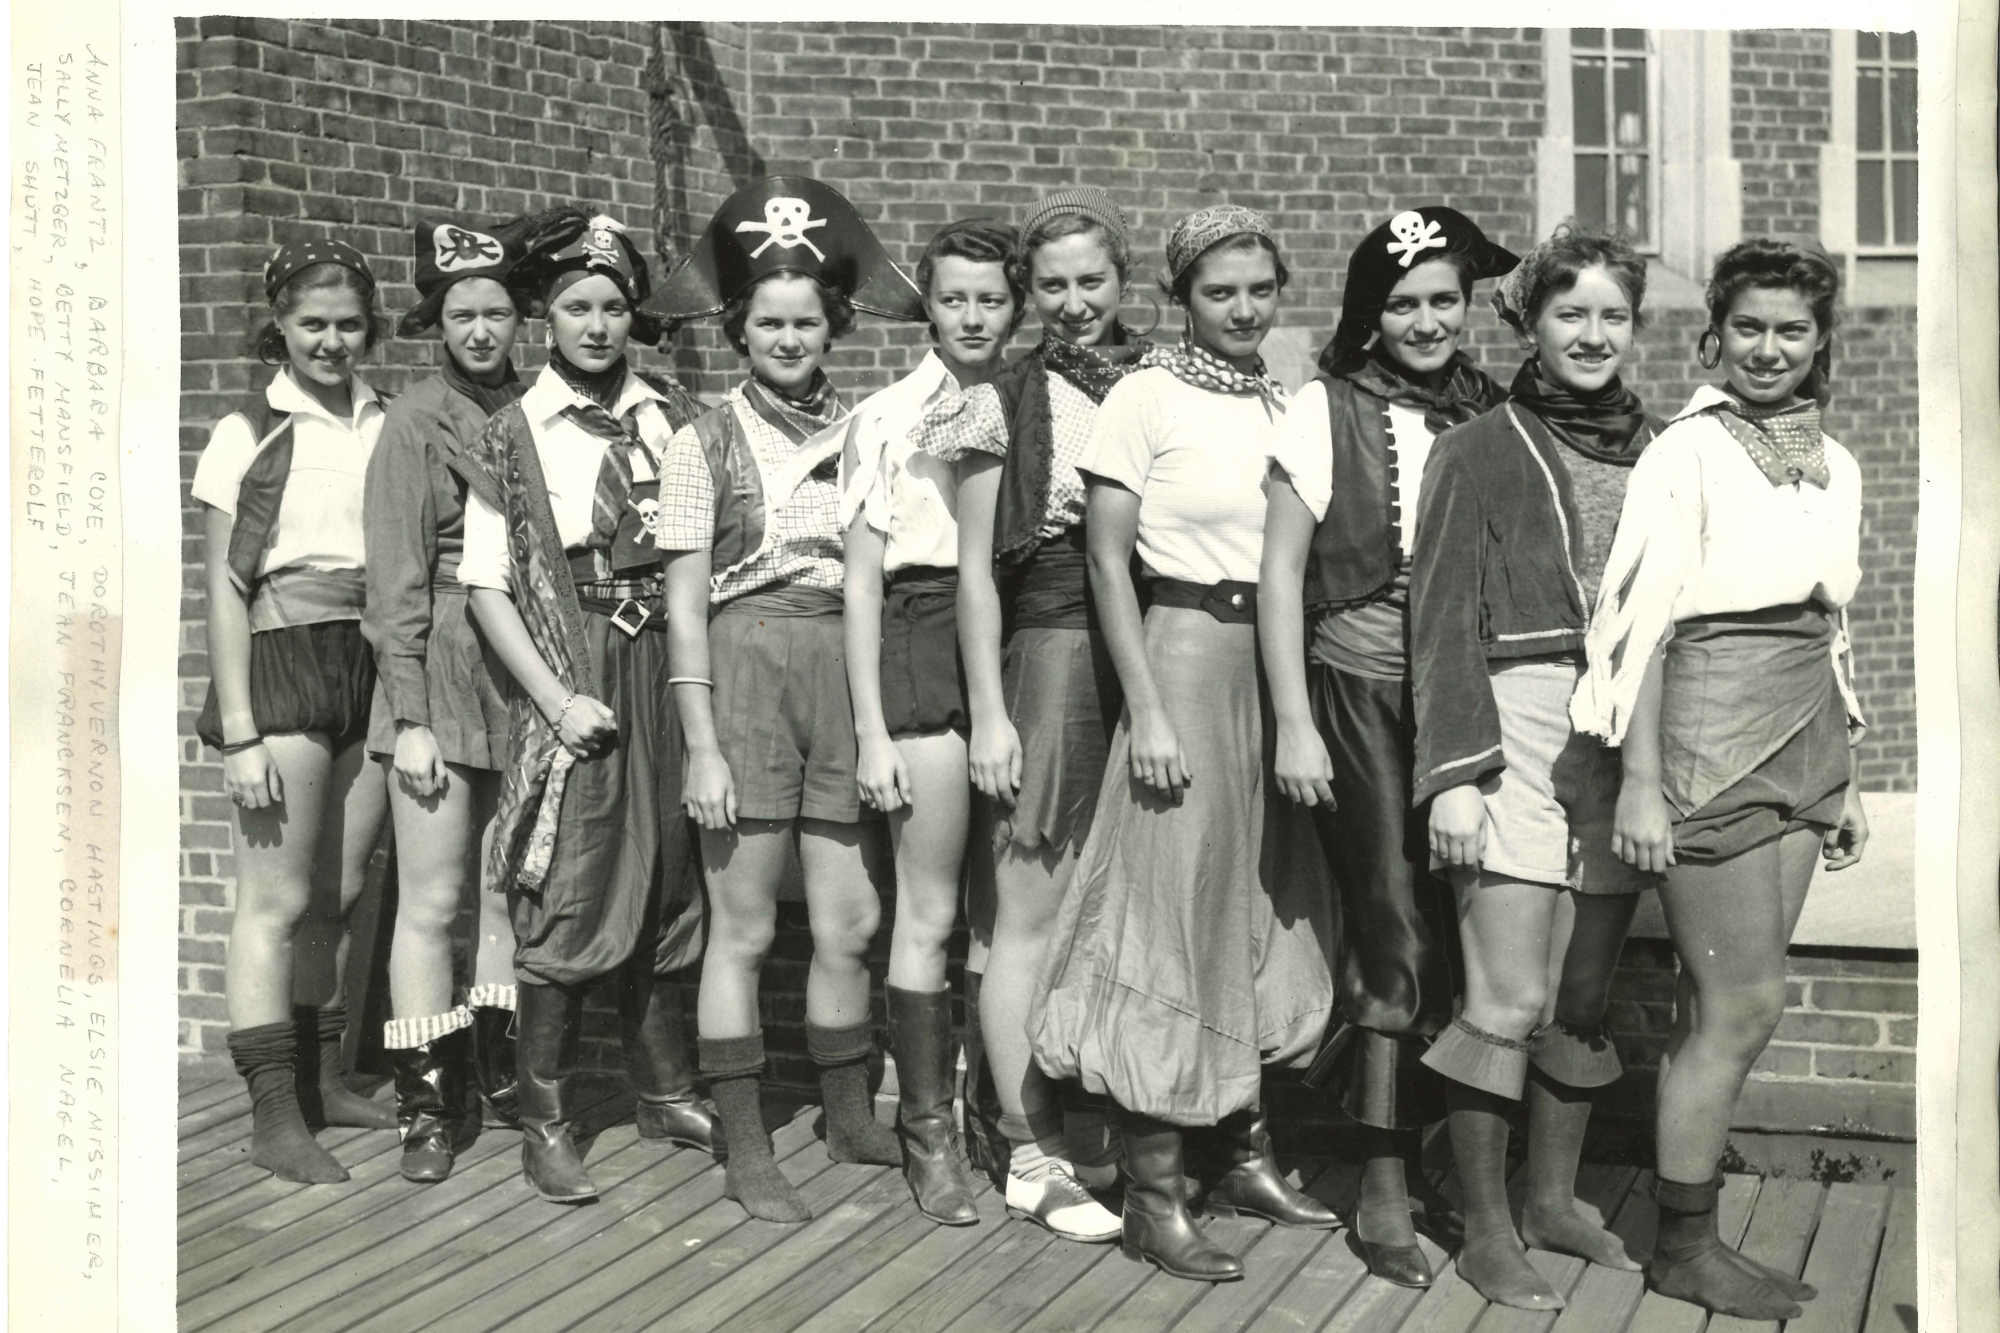 A group of students dressed up as pirates standing in a line, turned to face the camera slightly.